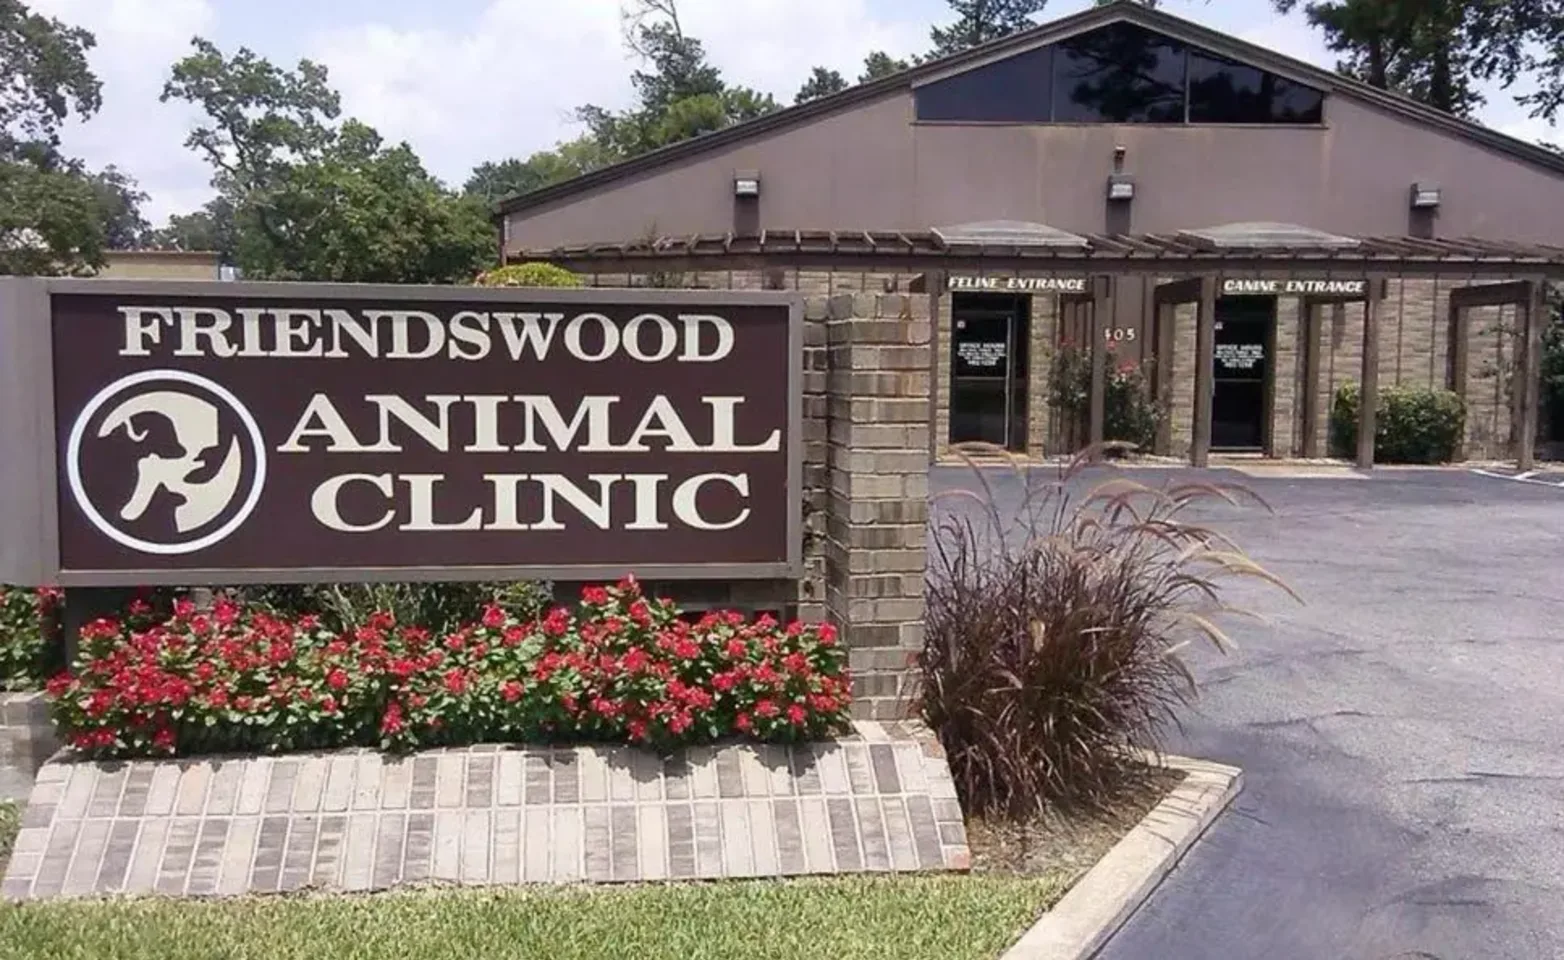 Friendswood Animal Clinic Exterior 